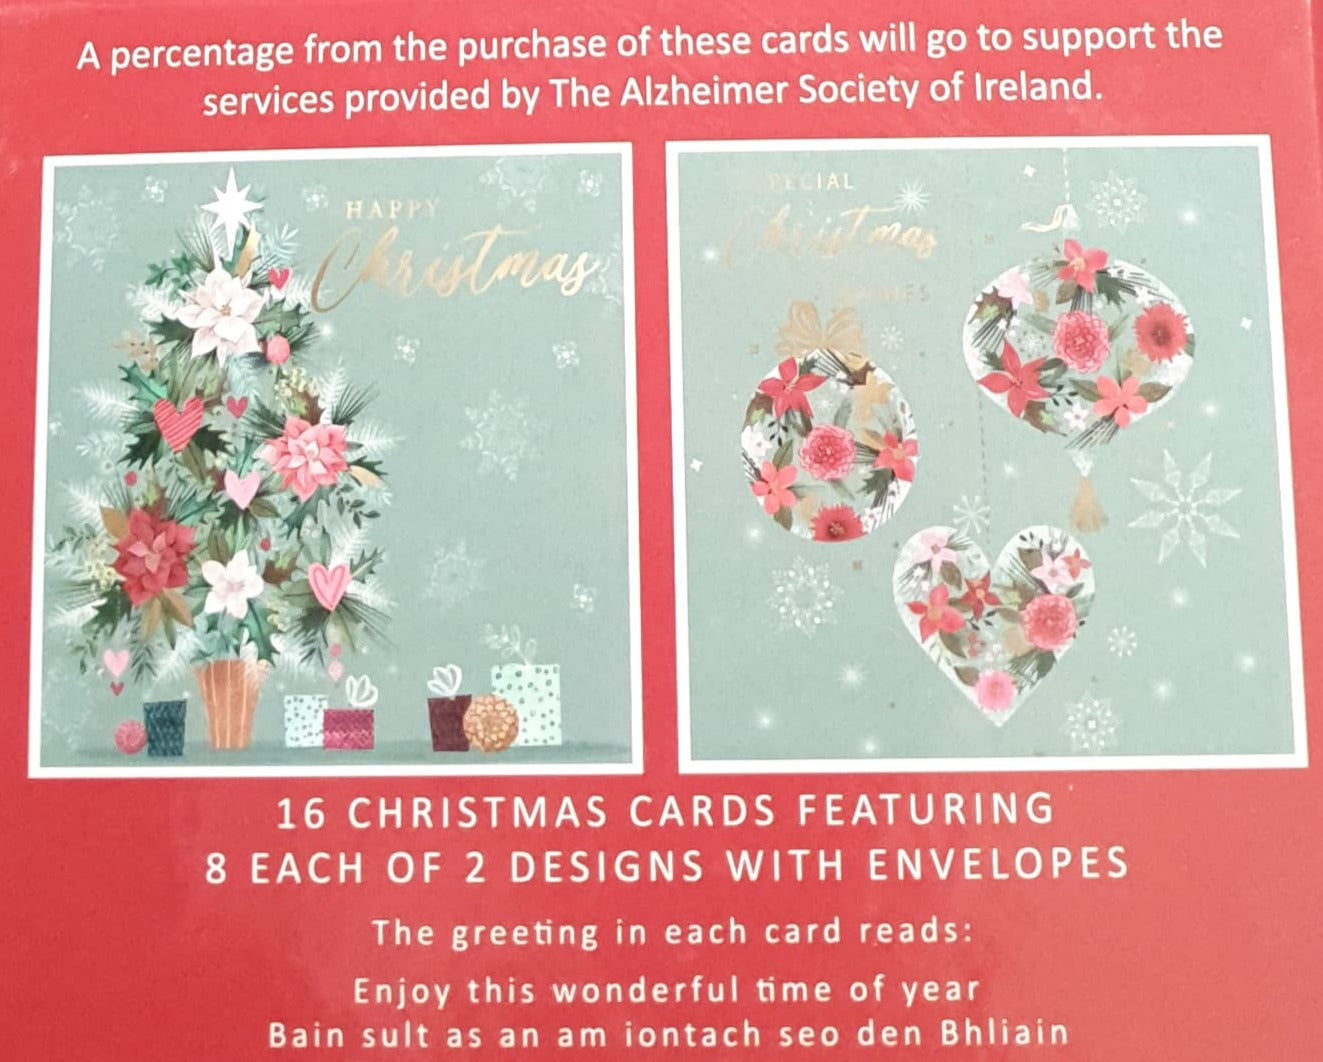 Charity Christmas Card (In Irish & English) - Box of 16 / Alzheimer Society of Ireland - Pink & Red Floral Tree